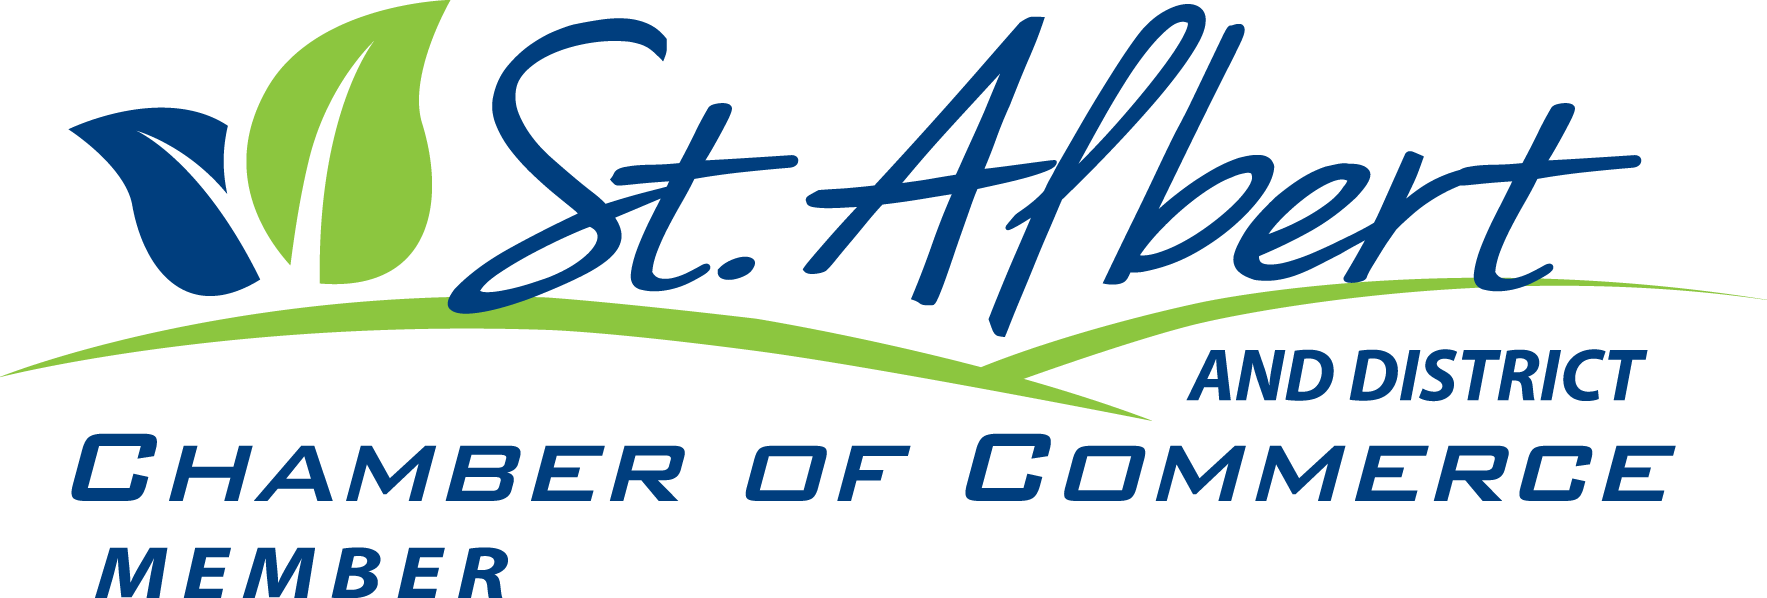 The logo for the st. albert and district chamber of commerce